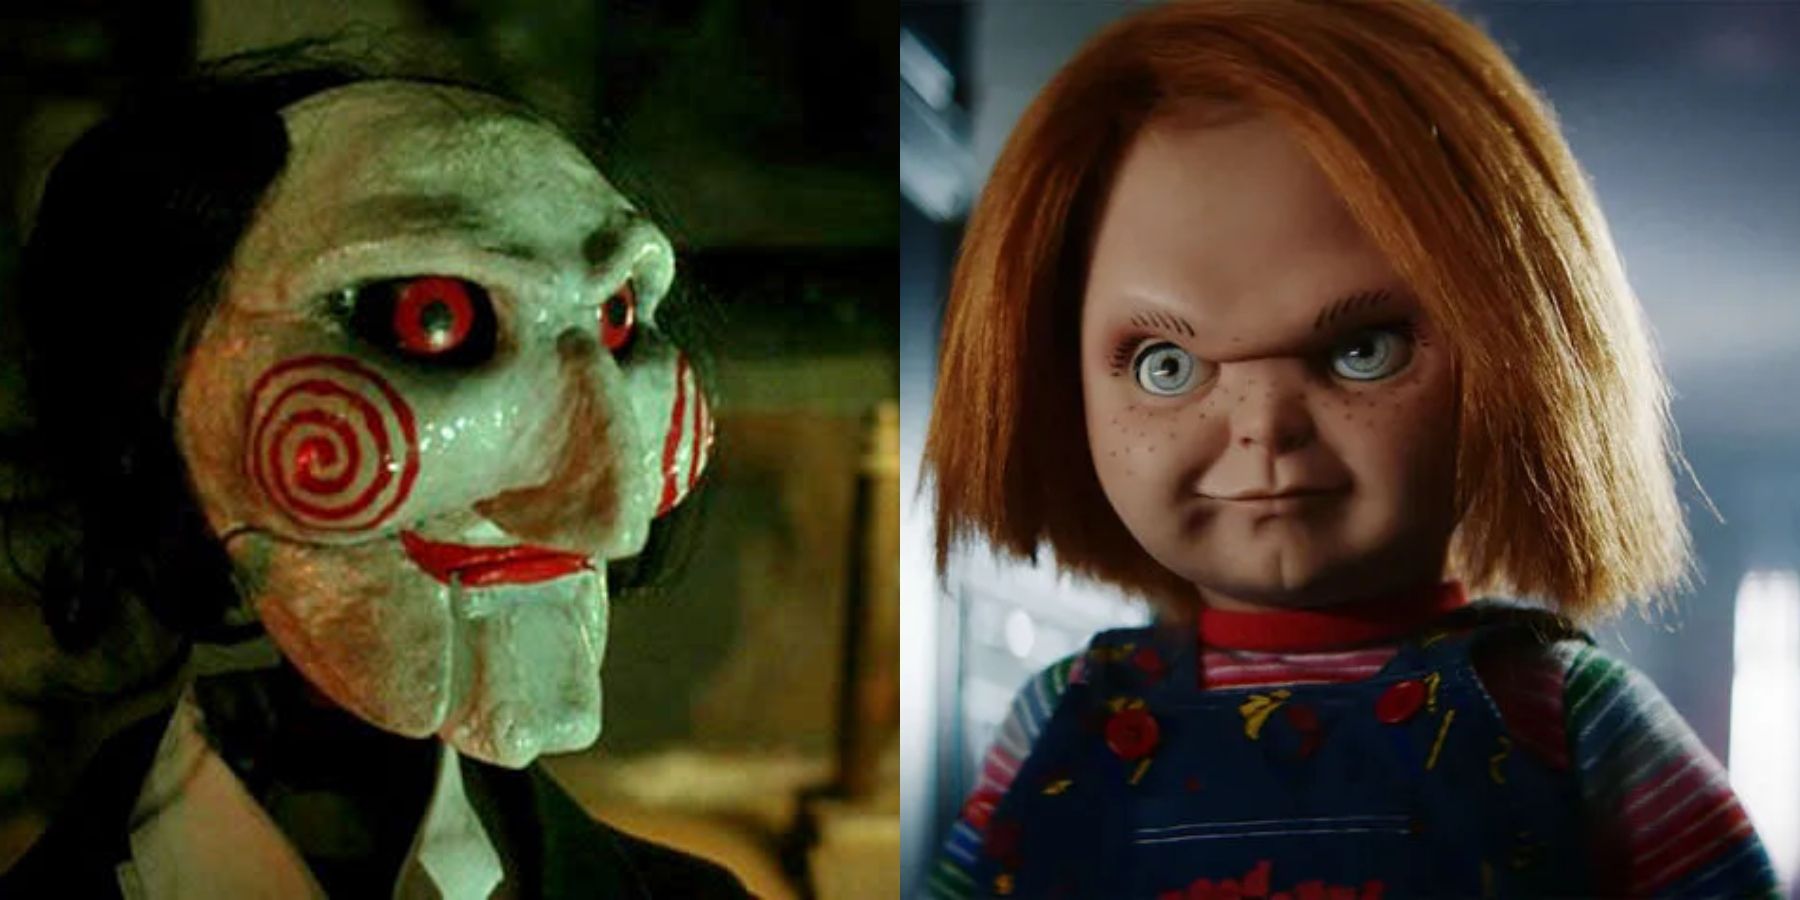 Split image of John Kramer/Jigsaw in Saw and Chucky in Child's Play